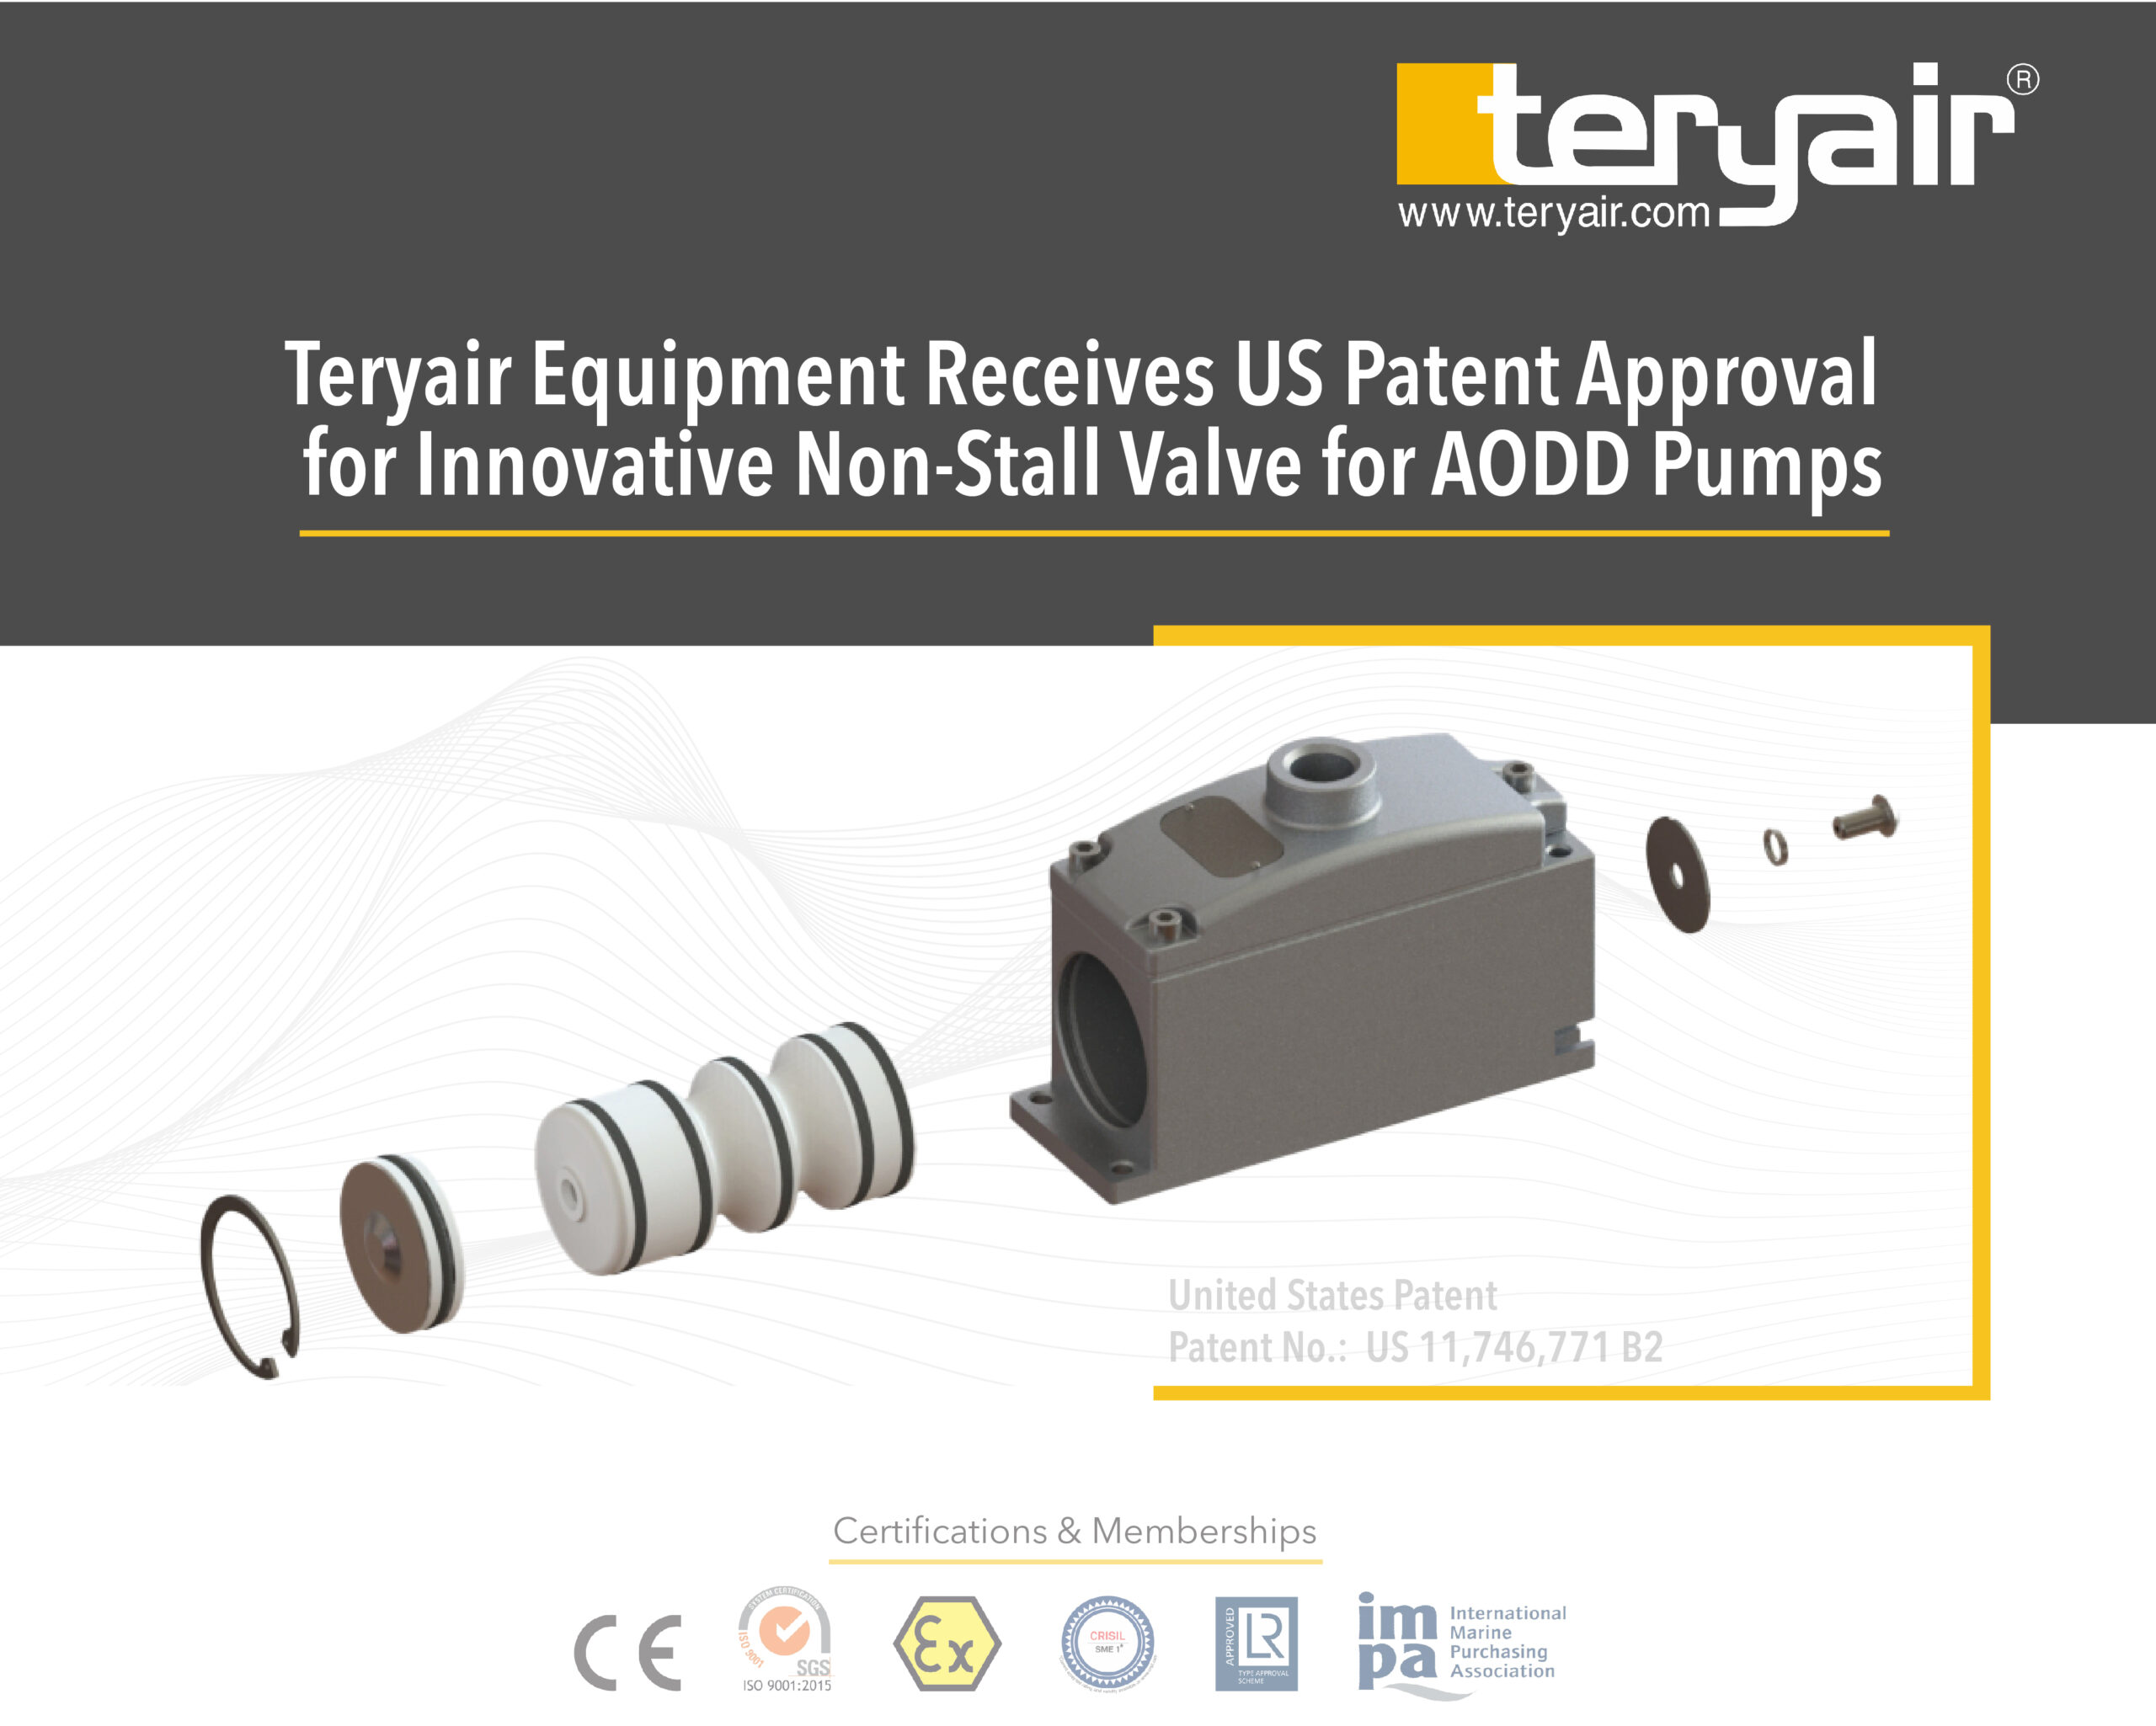 teryair_equipment_receives_US_Patent_Approval-01-01